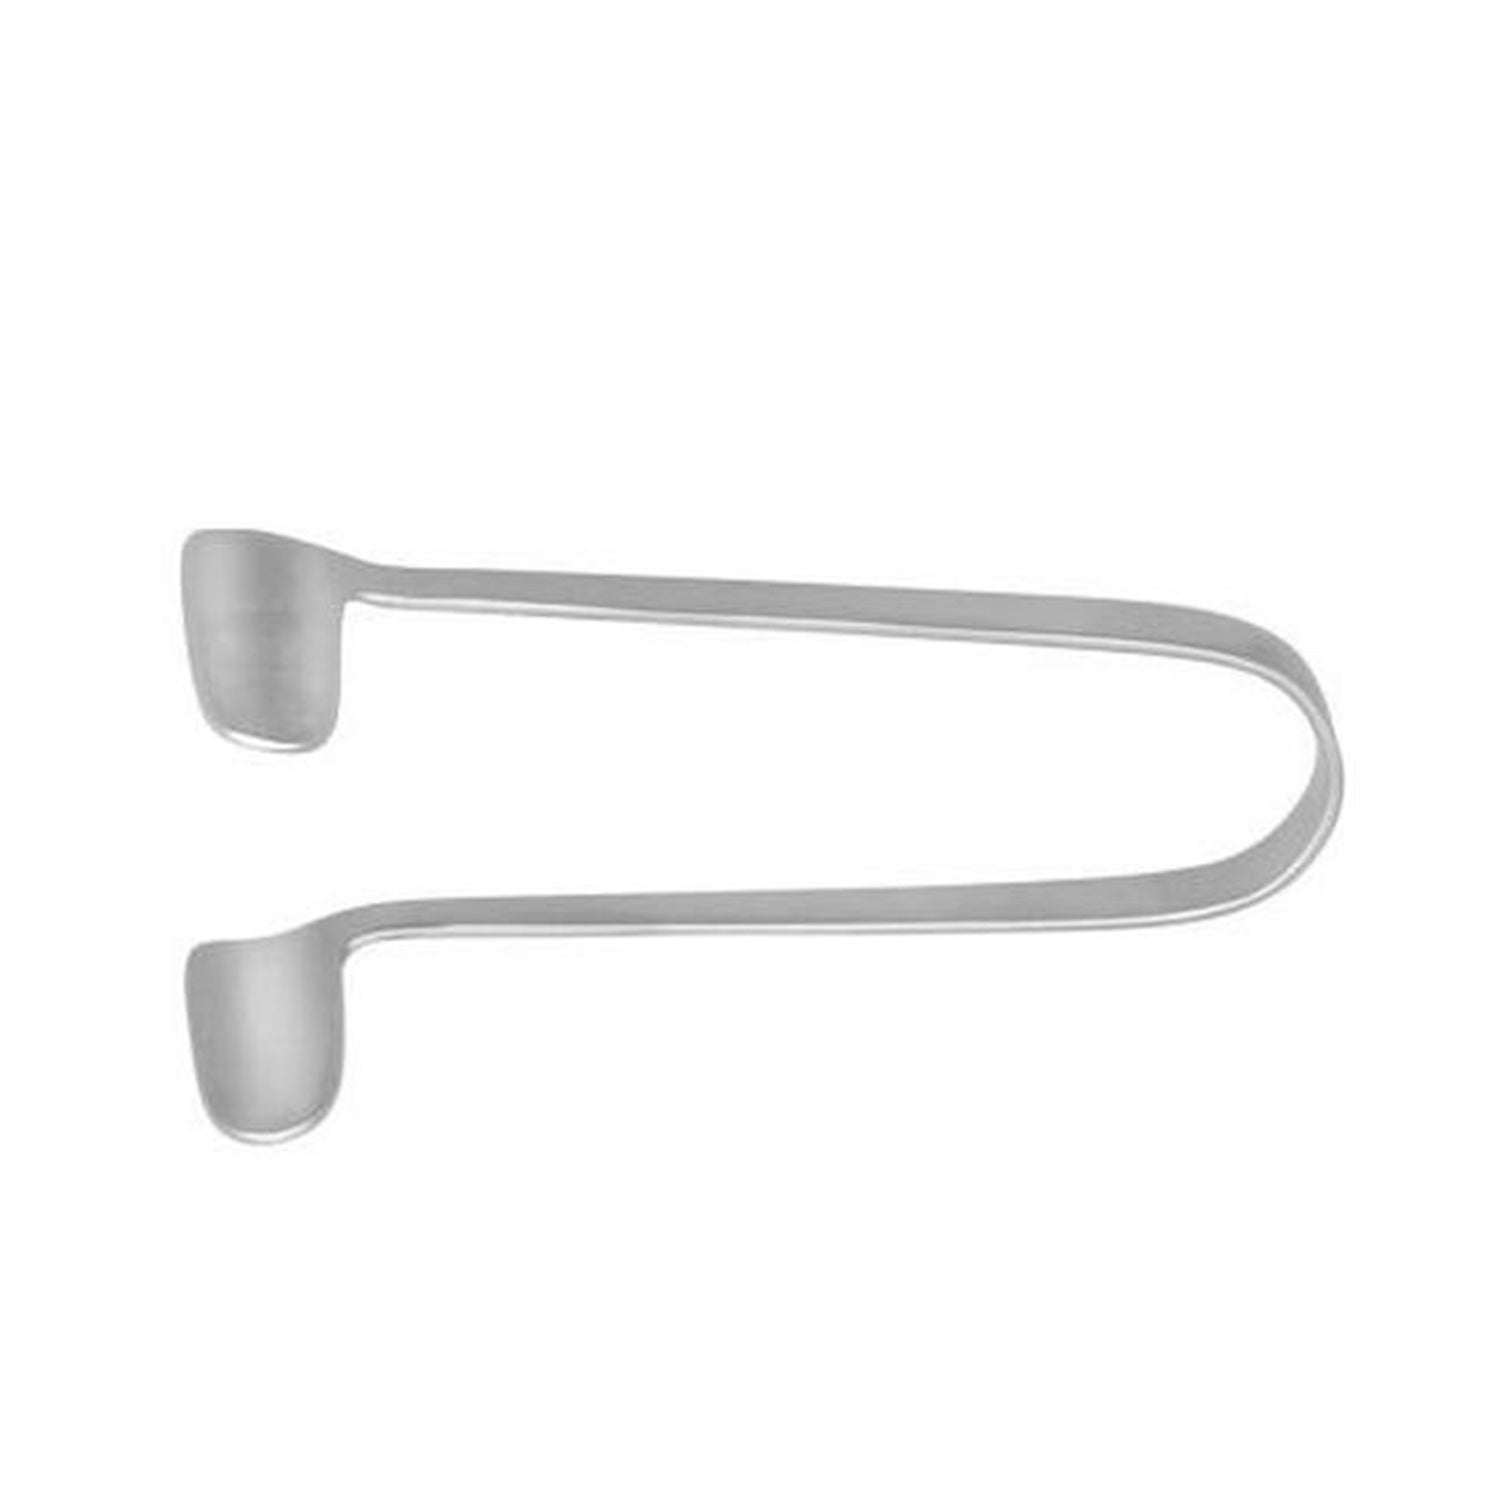 Rocialle Thudichum Nasal Speculum | Size 6 | Single (2)